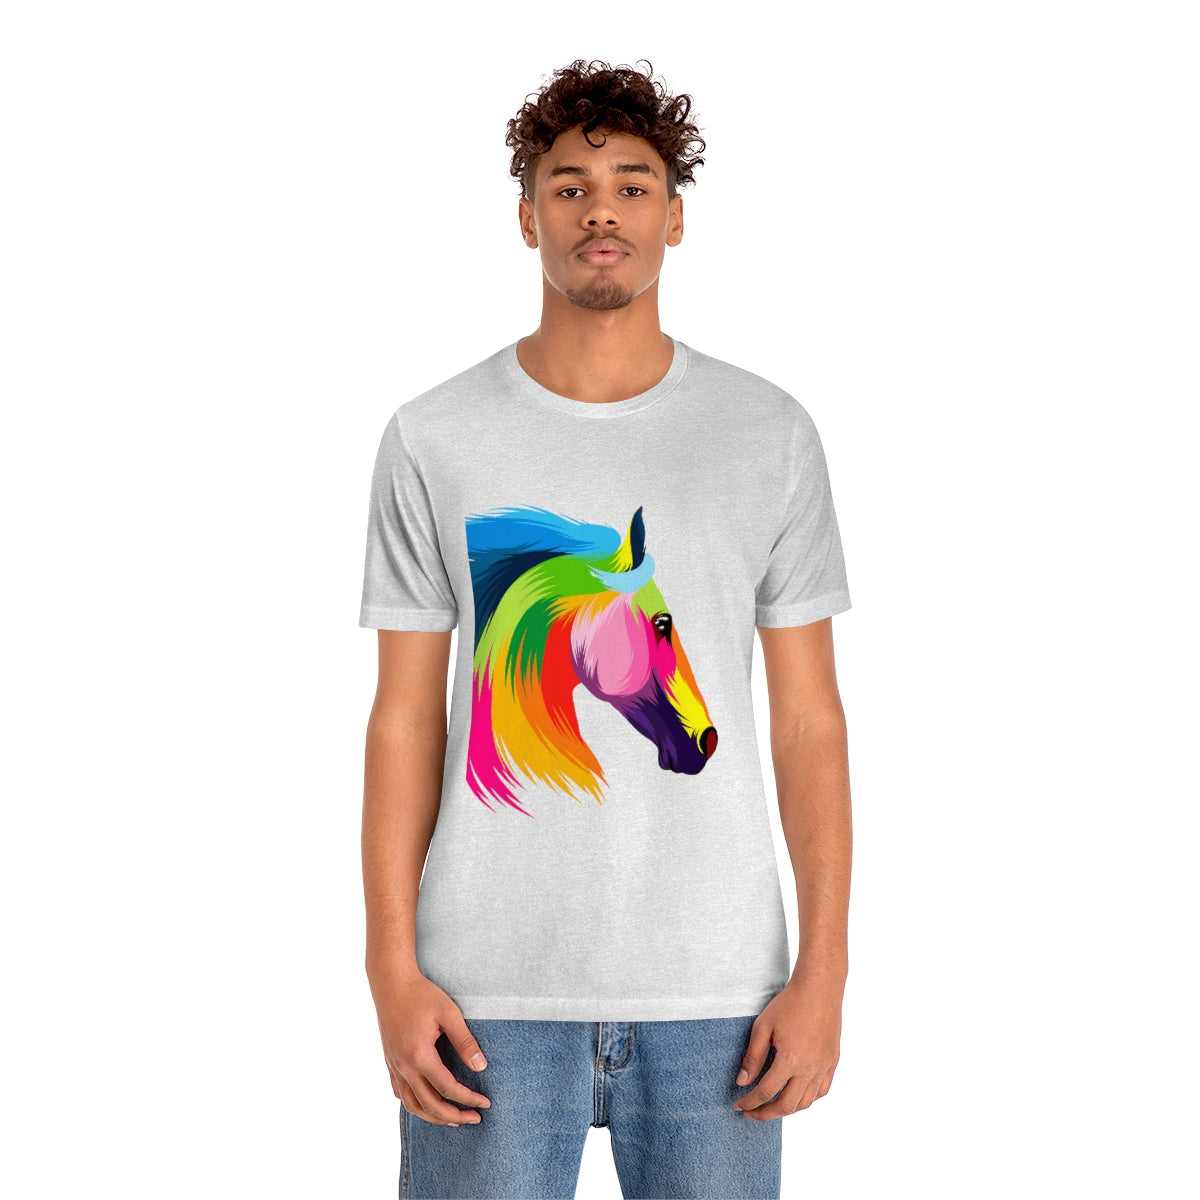 Unisex Jersey Short Sleeve Tee "Abstract colorful horse"